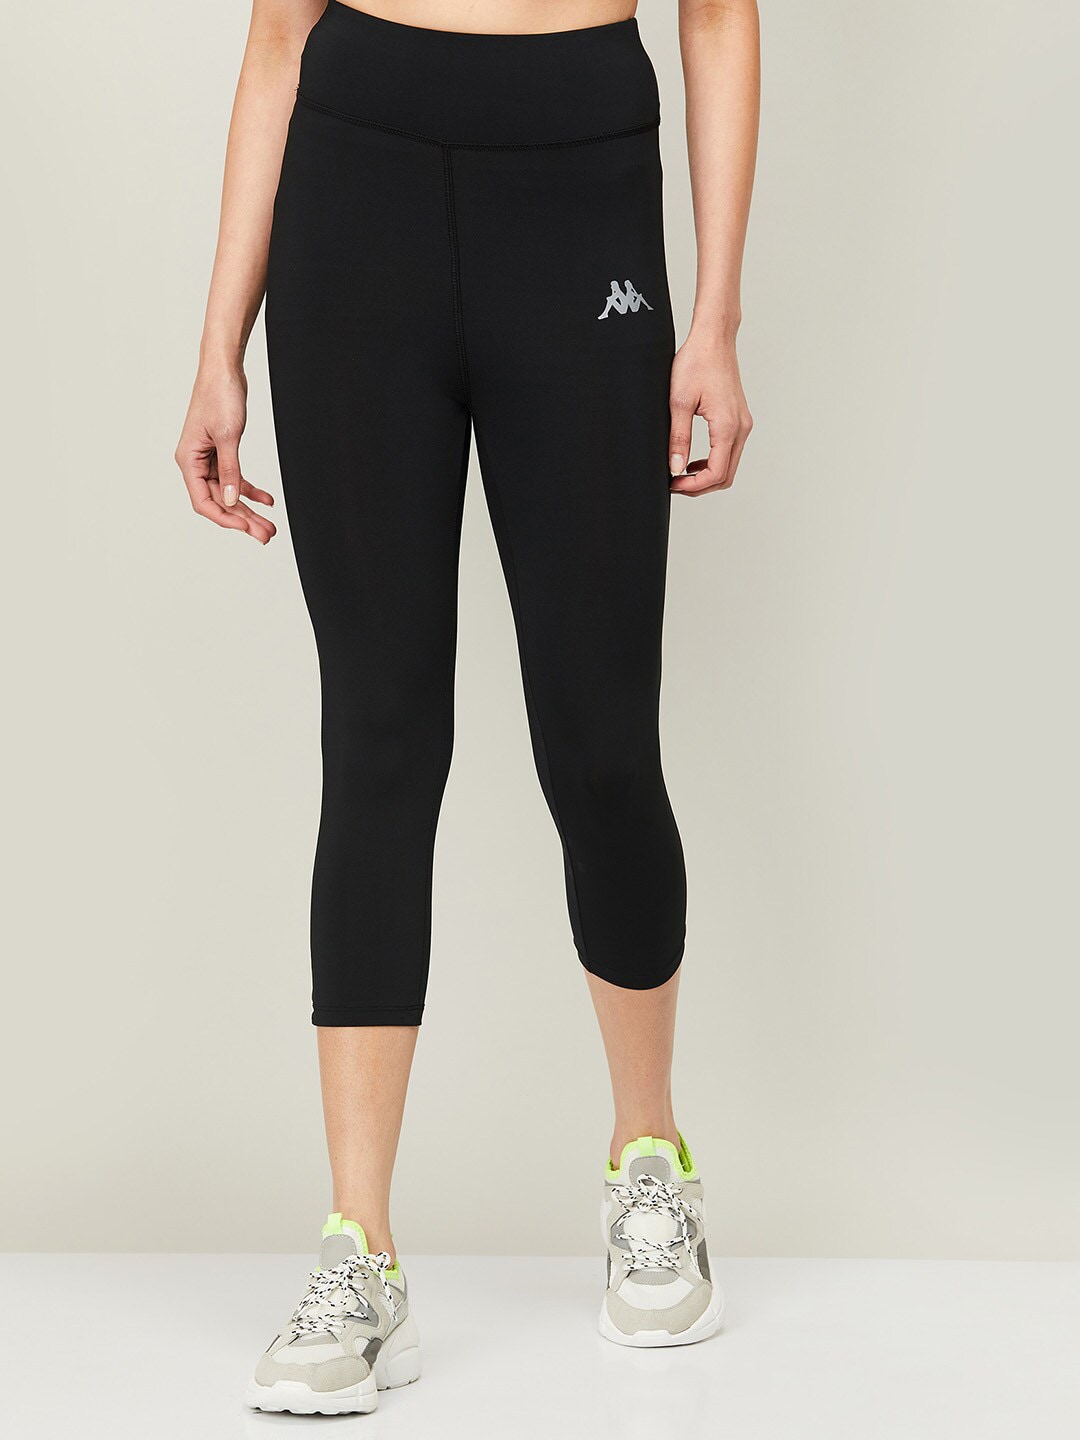 Kappa Women Black Solid Cotton Sports Tights Price in India